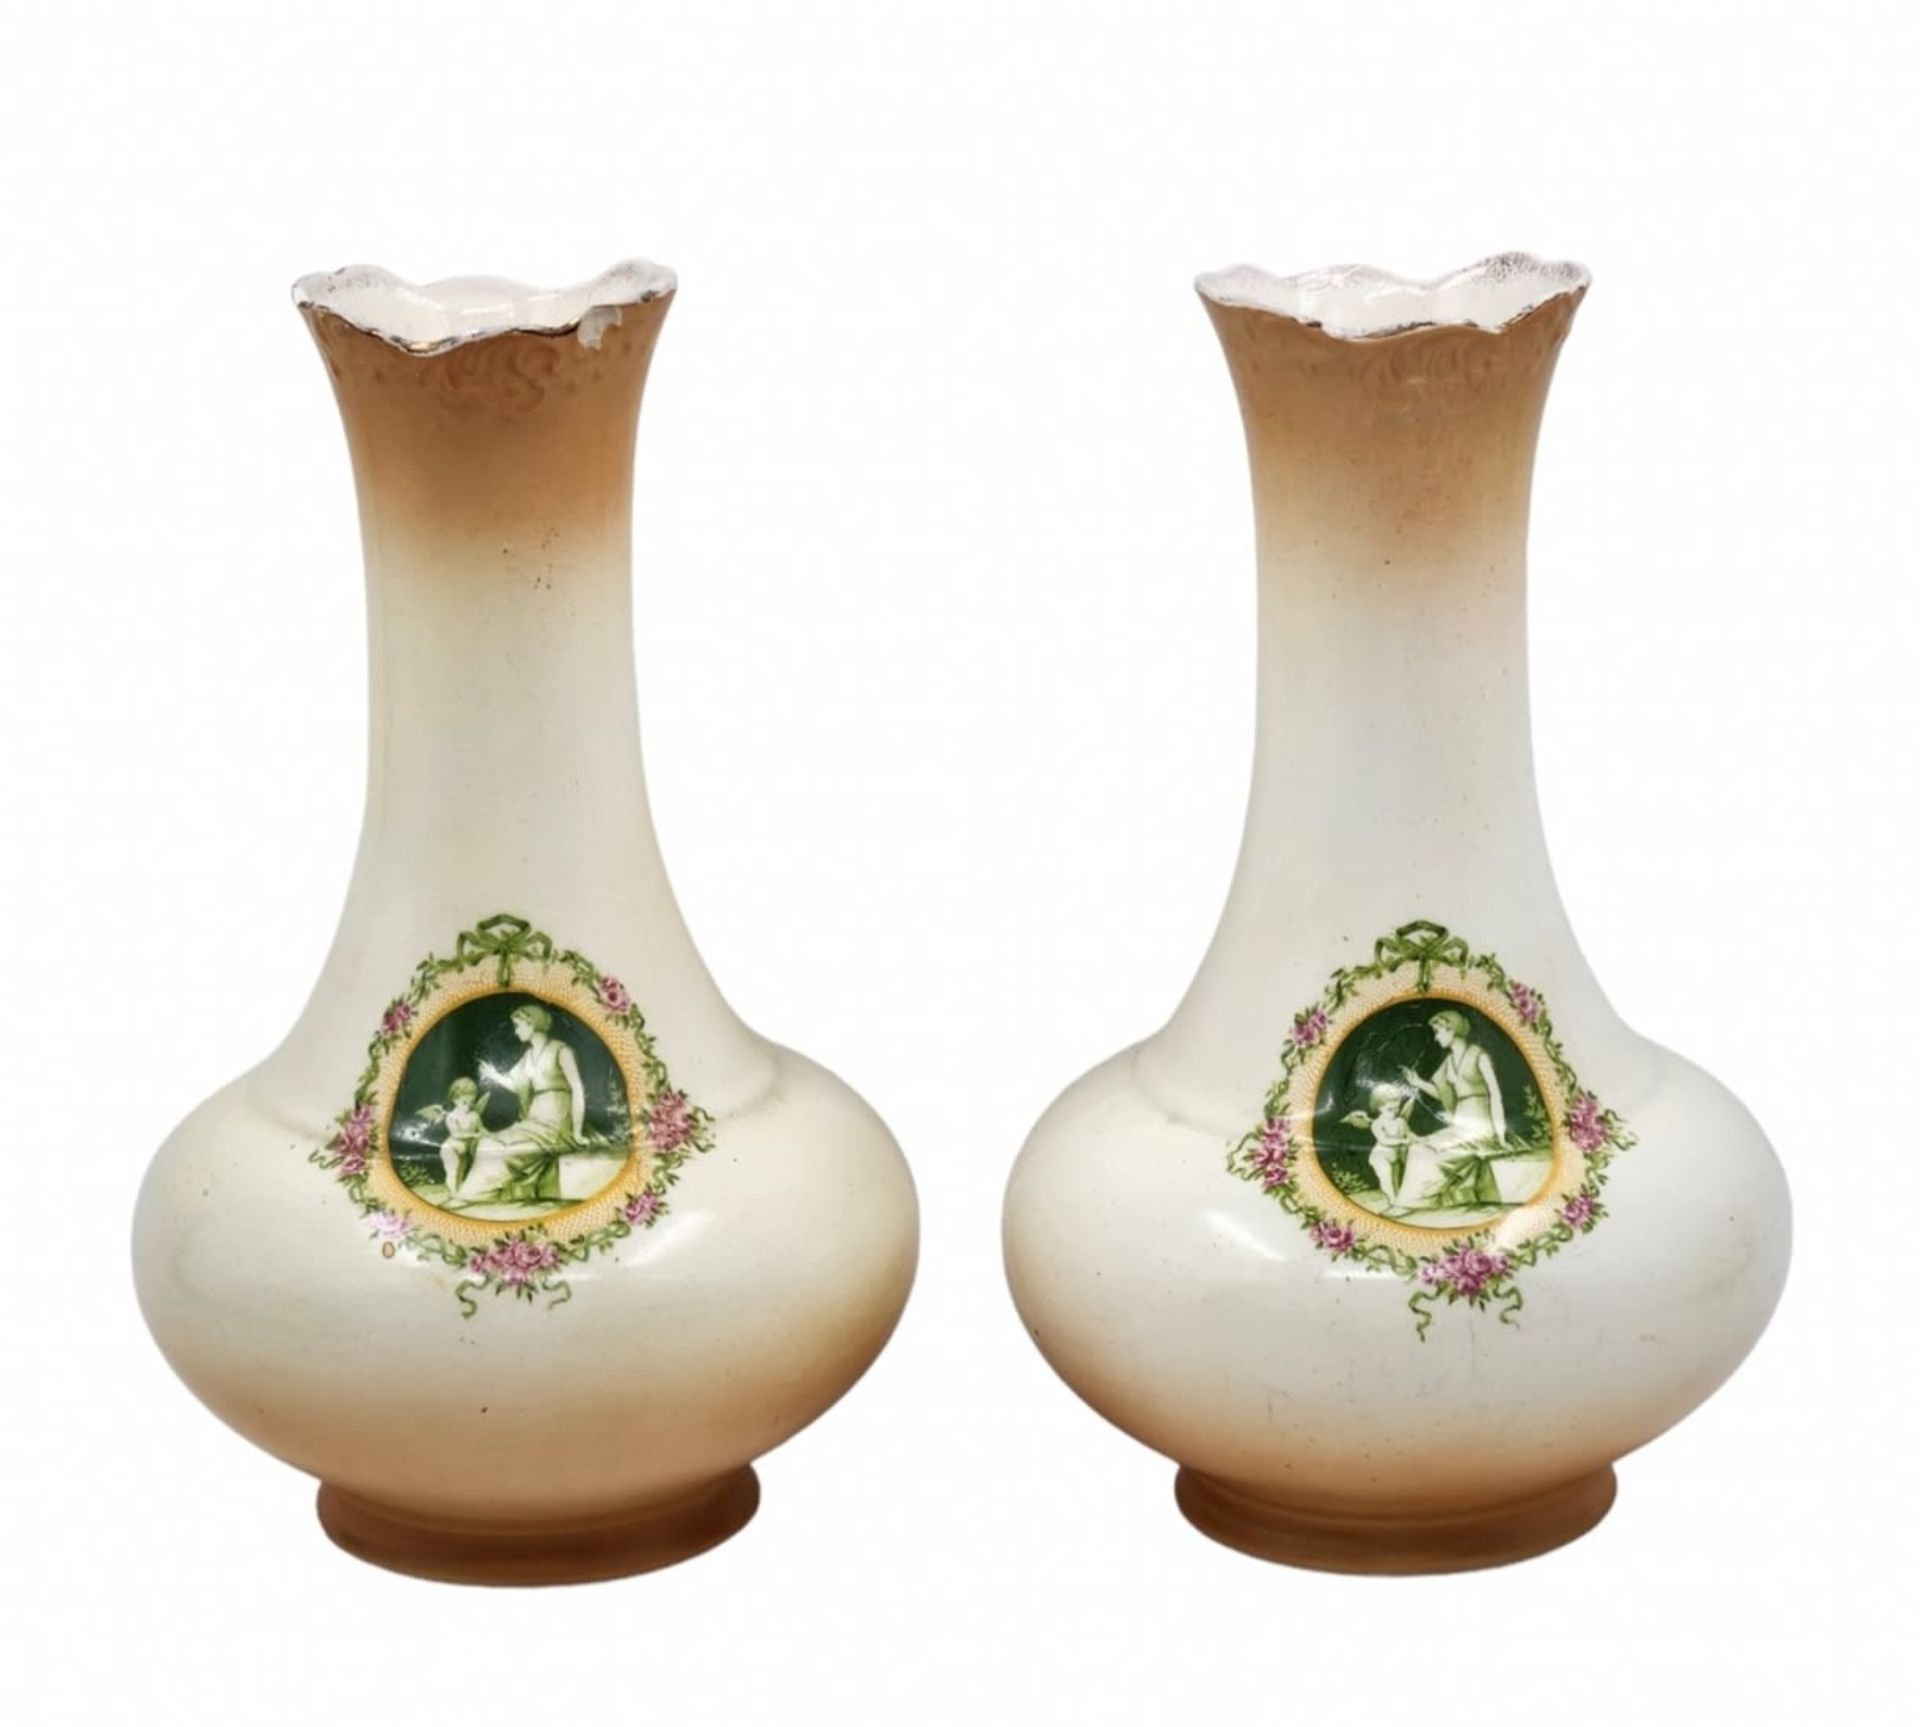 A pair of antique English jugs (Victorian) from the 19th century, made by: 'Samuel Fielding & Co - Image 2 of 5